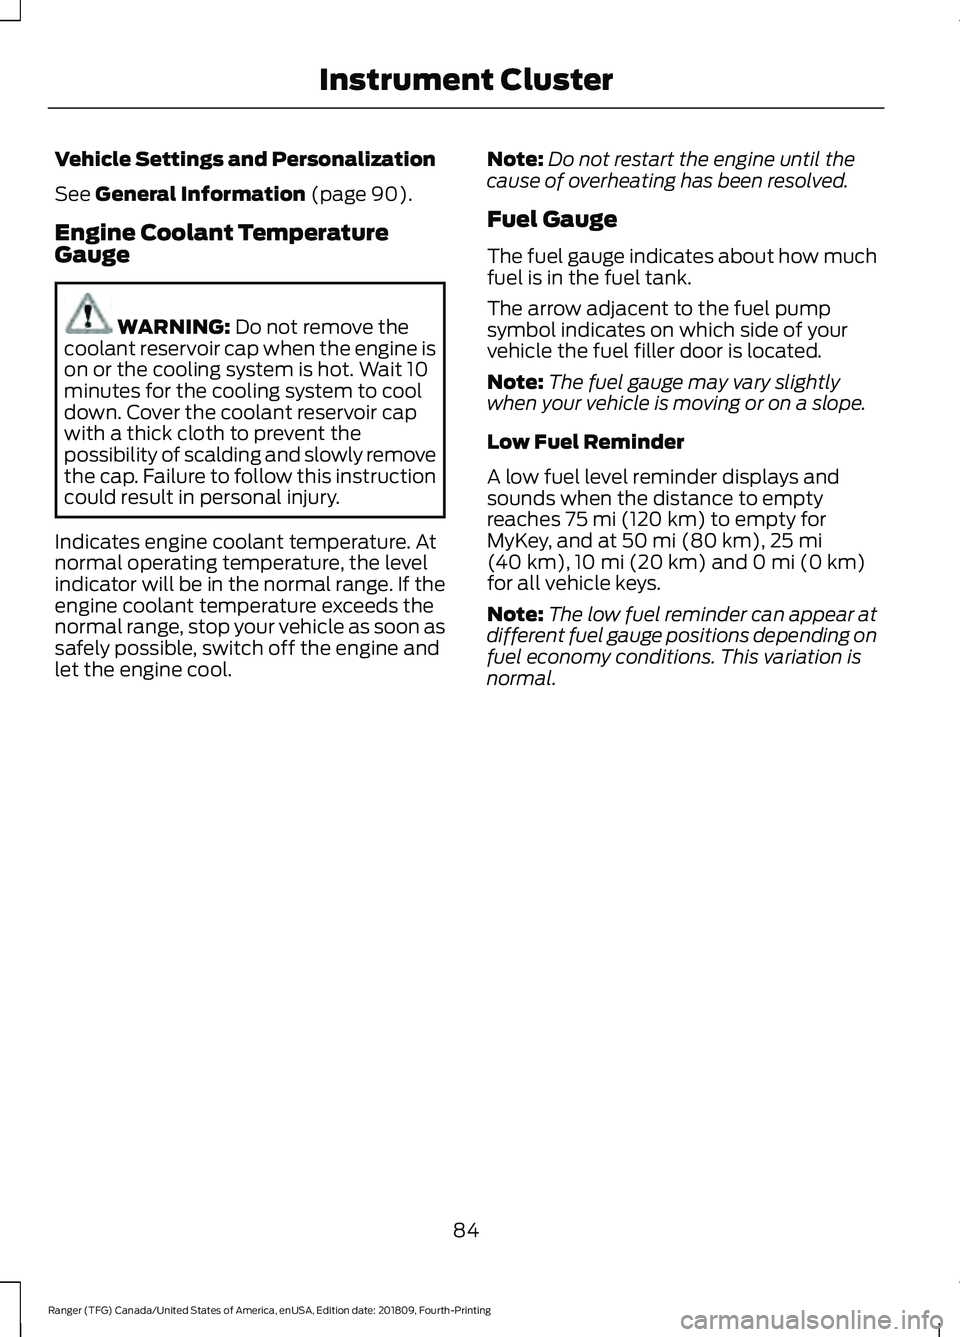 FORD RANGER 2019  Owners Manual Vehicle Settings and Personalization
See General Information (page 90).
Engine Coolant Temperature
Gauge WARNING: 
Do not remove the
coolant reservoir cap when the engine is
on or the cooling system i